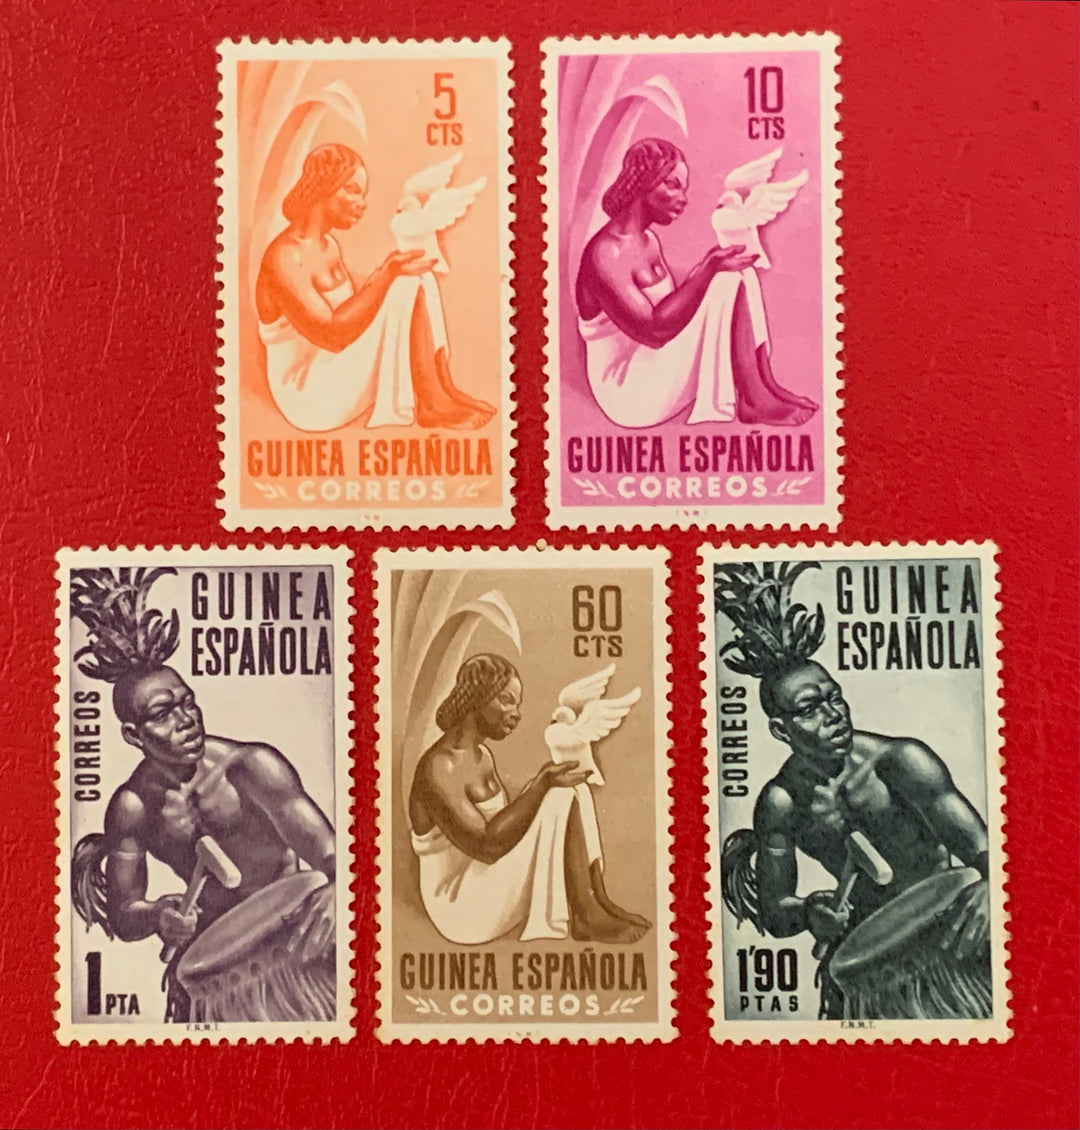 Spanish Guinea - Original Vintage Postage Stamps- 1953 Stamp Day & Definitive - for the collector, artist or crafter